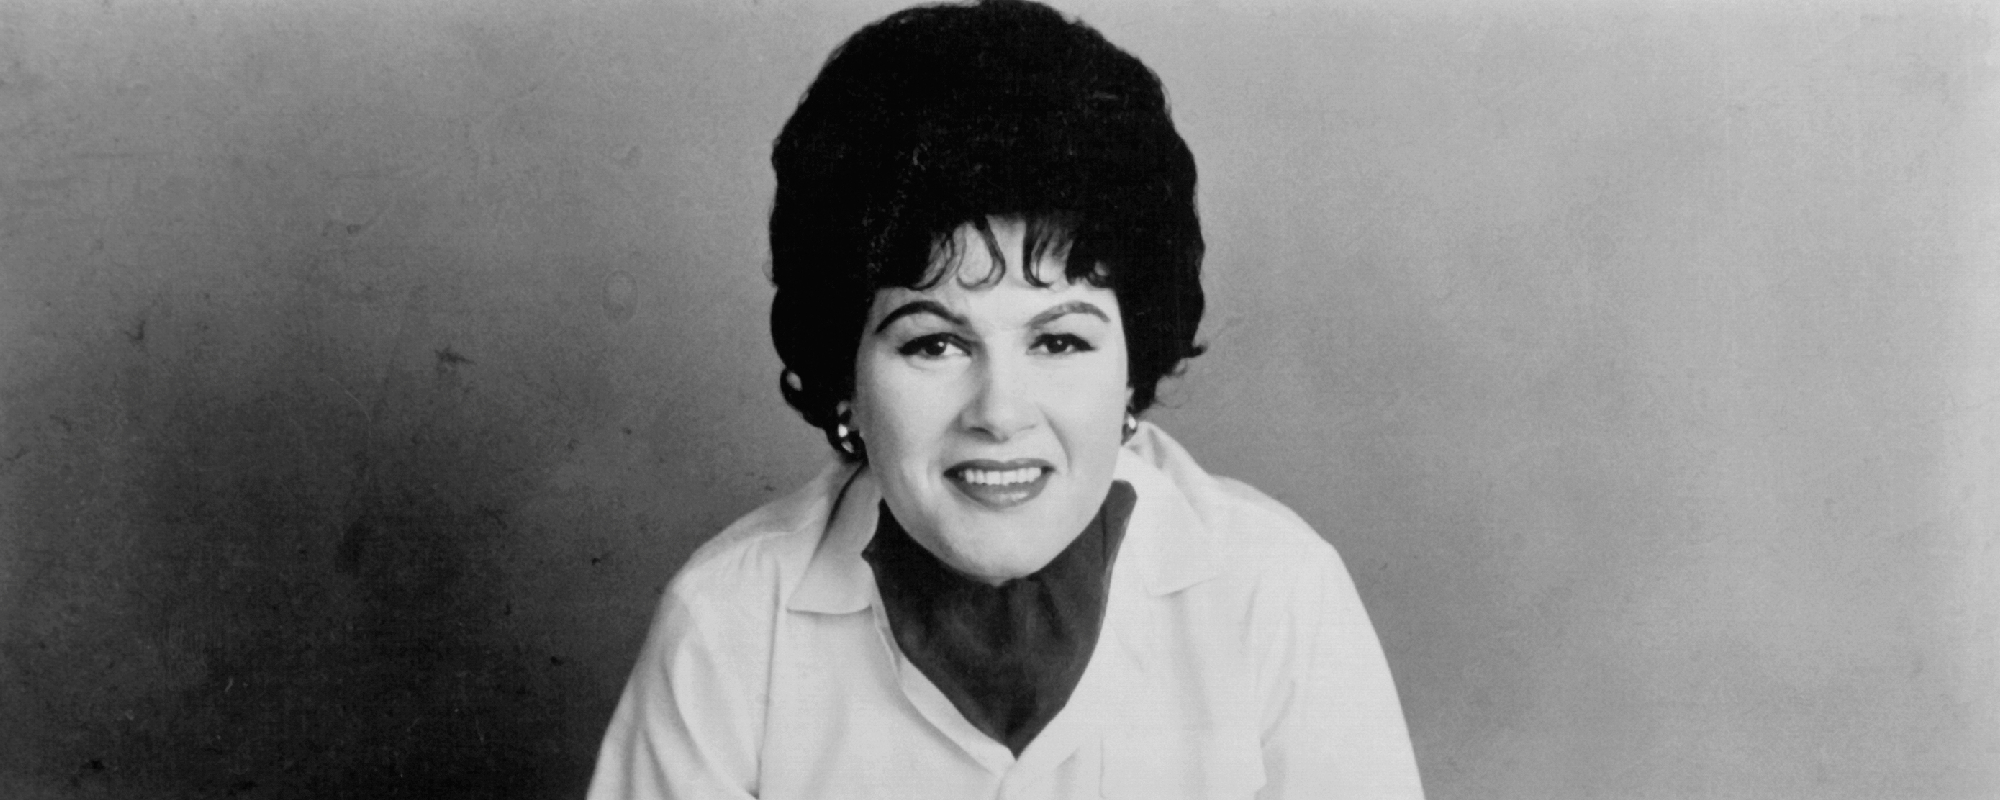 Patsy Cline To Be Honored With Tribute Concert Featuring First Lady Jill Biden